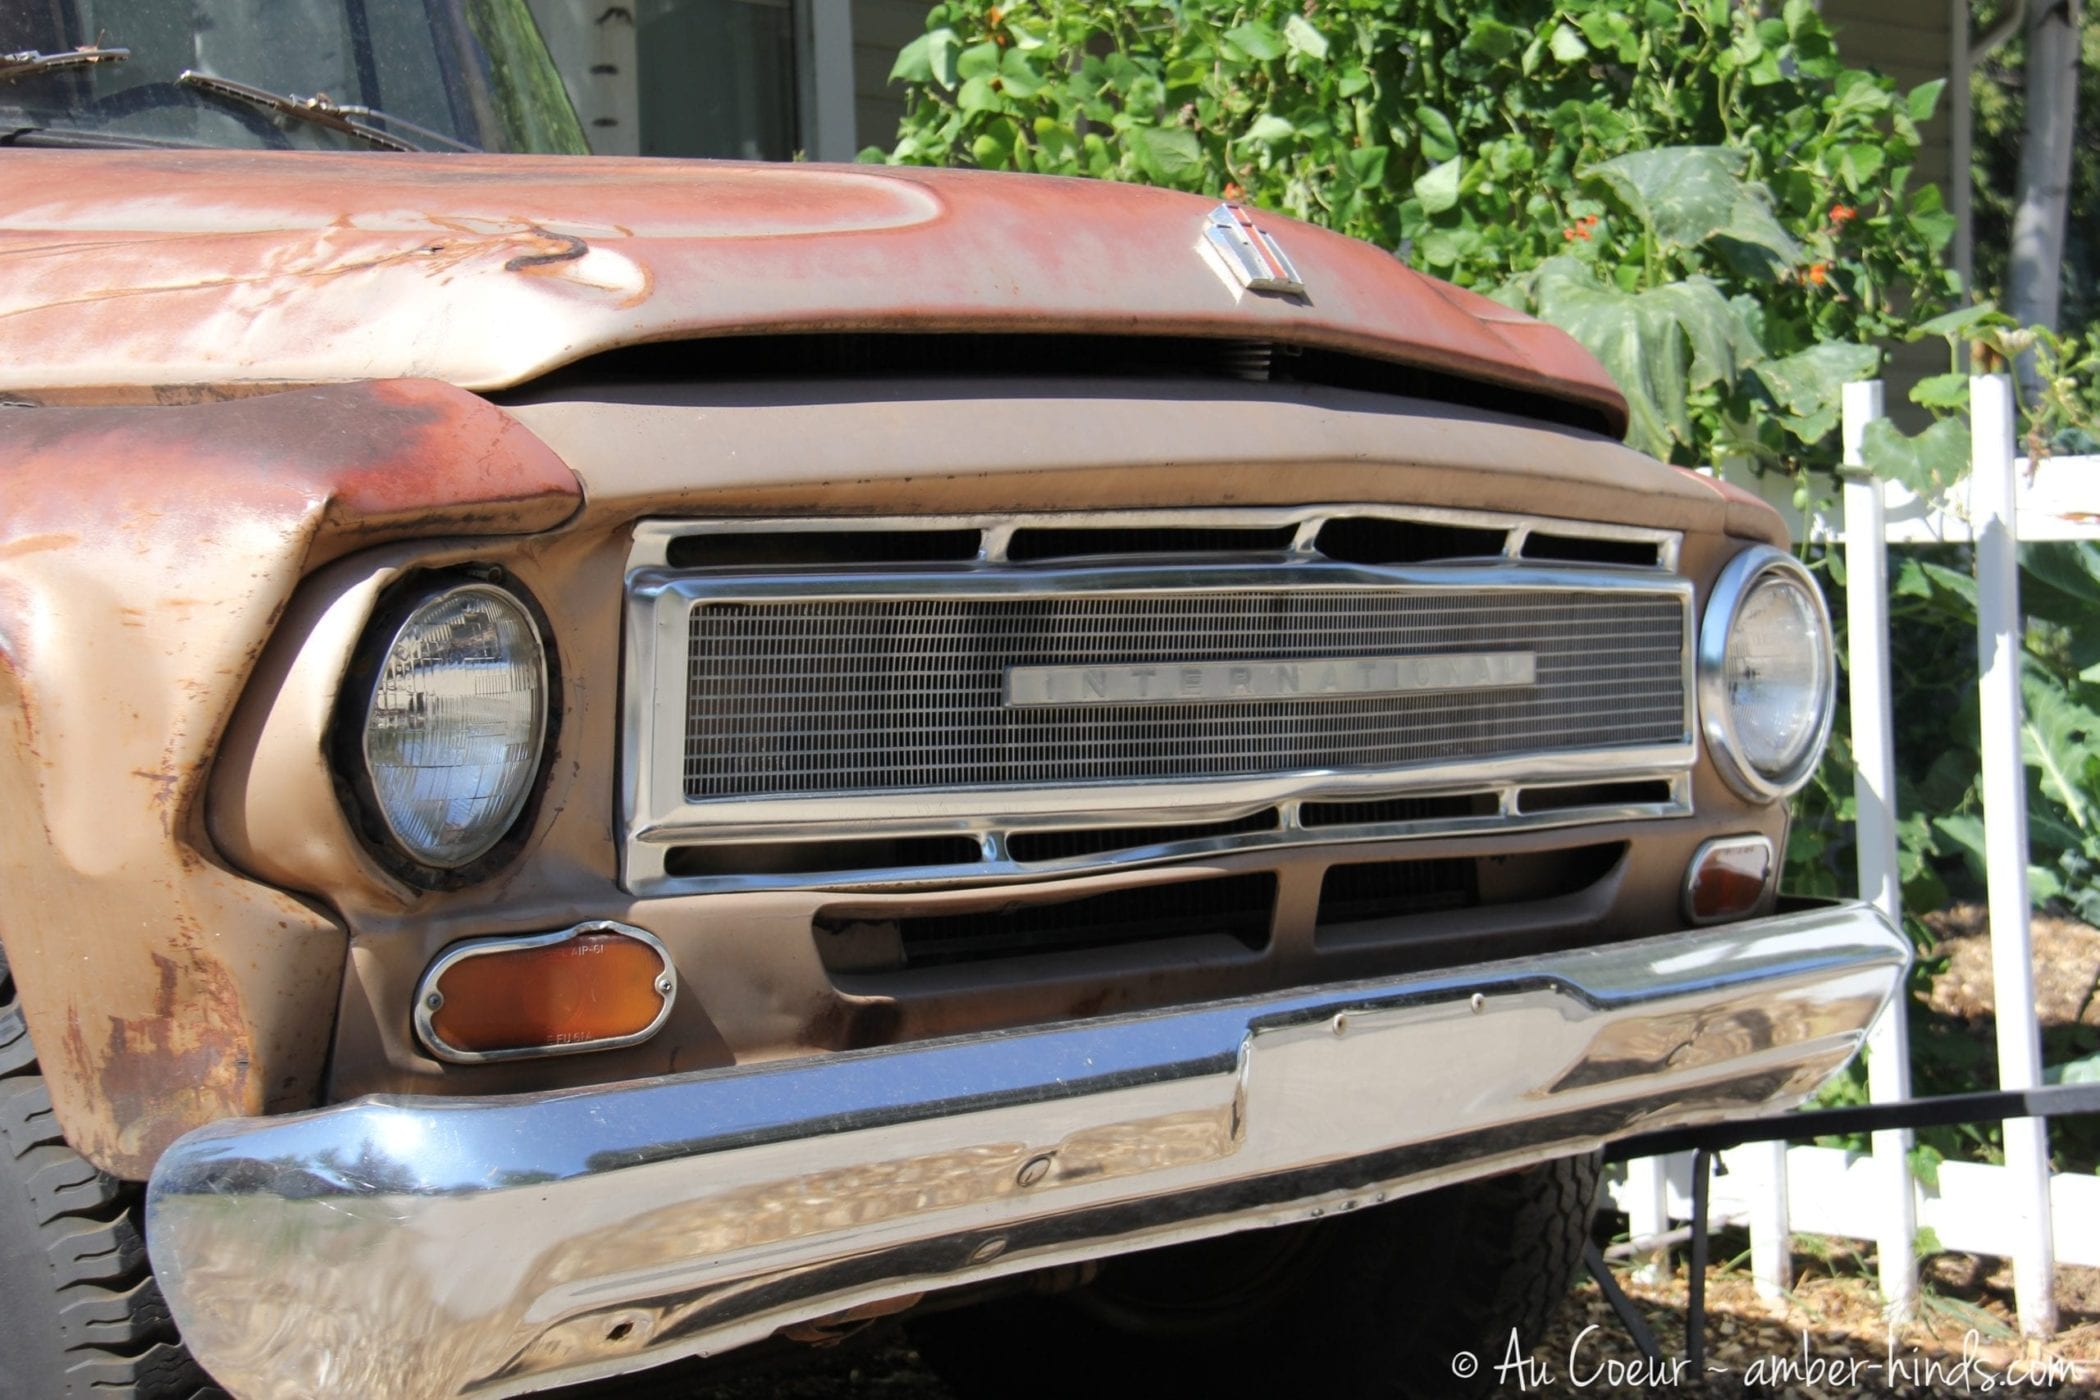 close up of the front of a rusty red international truck.